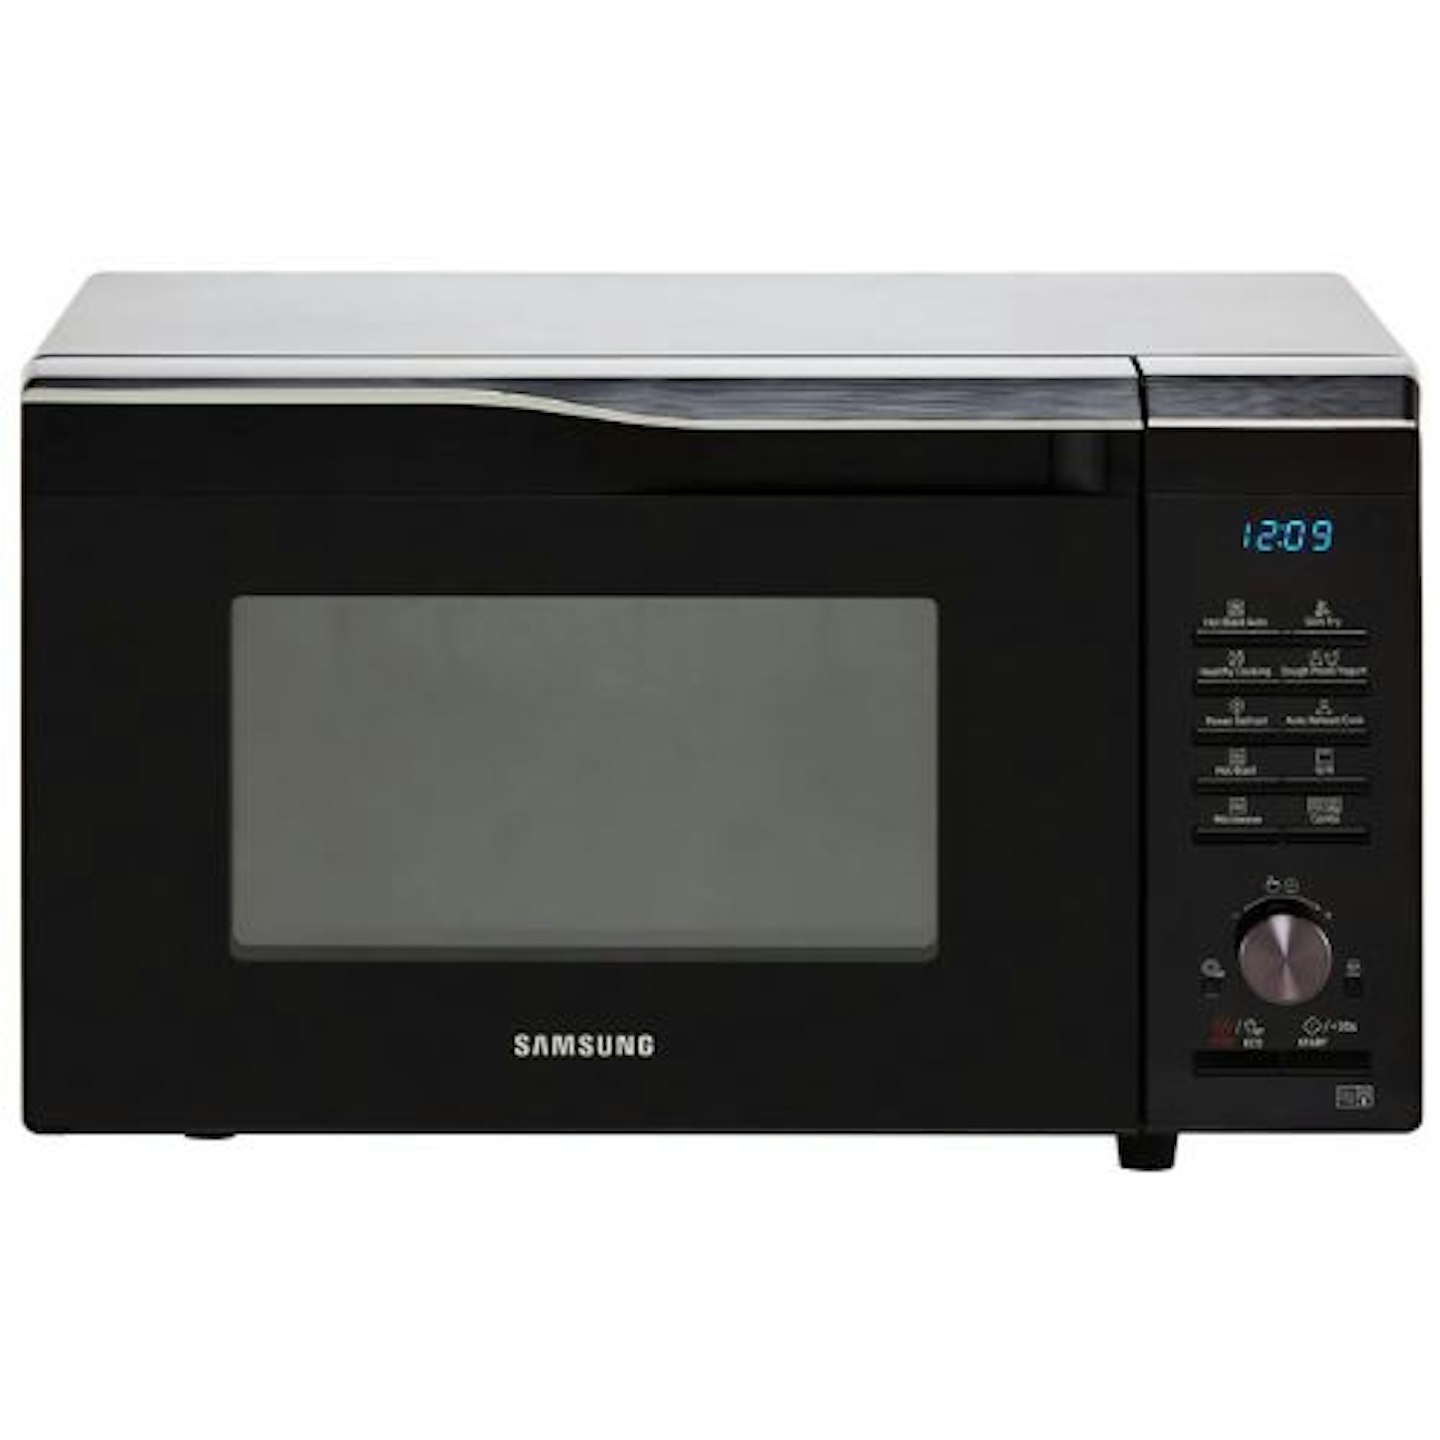 Samsung Easy View MC28M6055CK Combination Microwave Oven